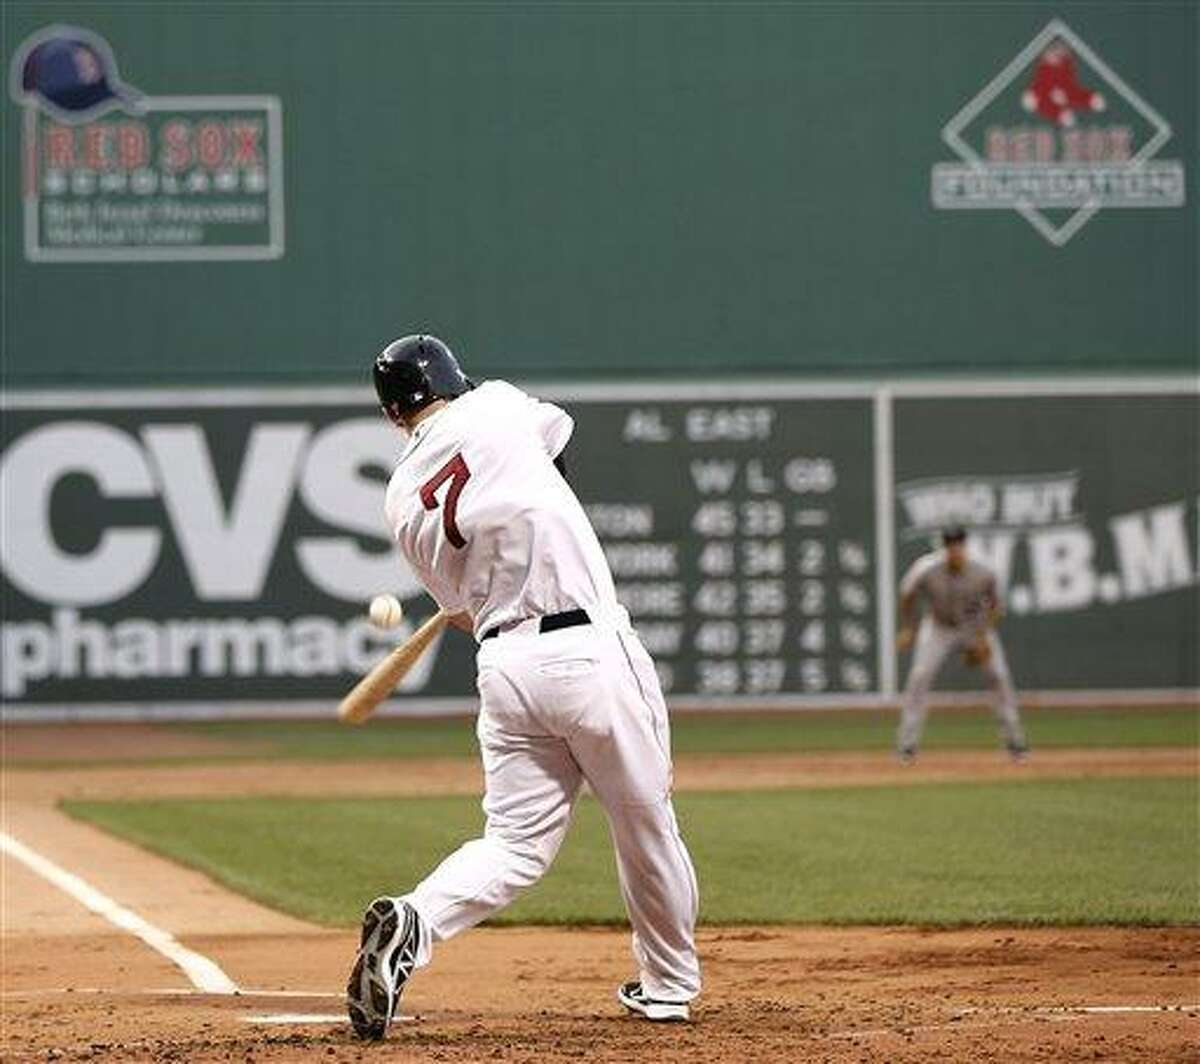 Boston Red Sox's Stephen Drew swings at a pitch during the first inning of a baseball game against the Colorado Rockies at Fenway Park in Boston Tuesday, June 25, 2013. (AP Photo/Winslow Townson)